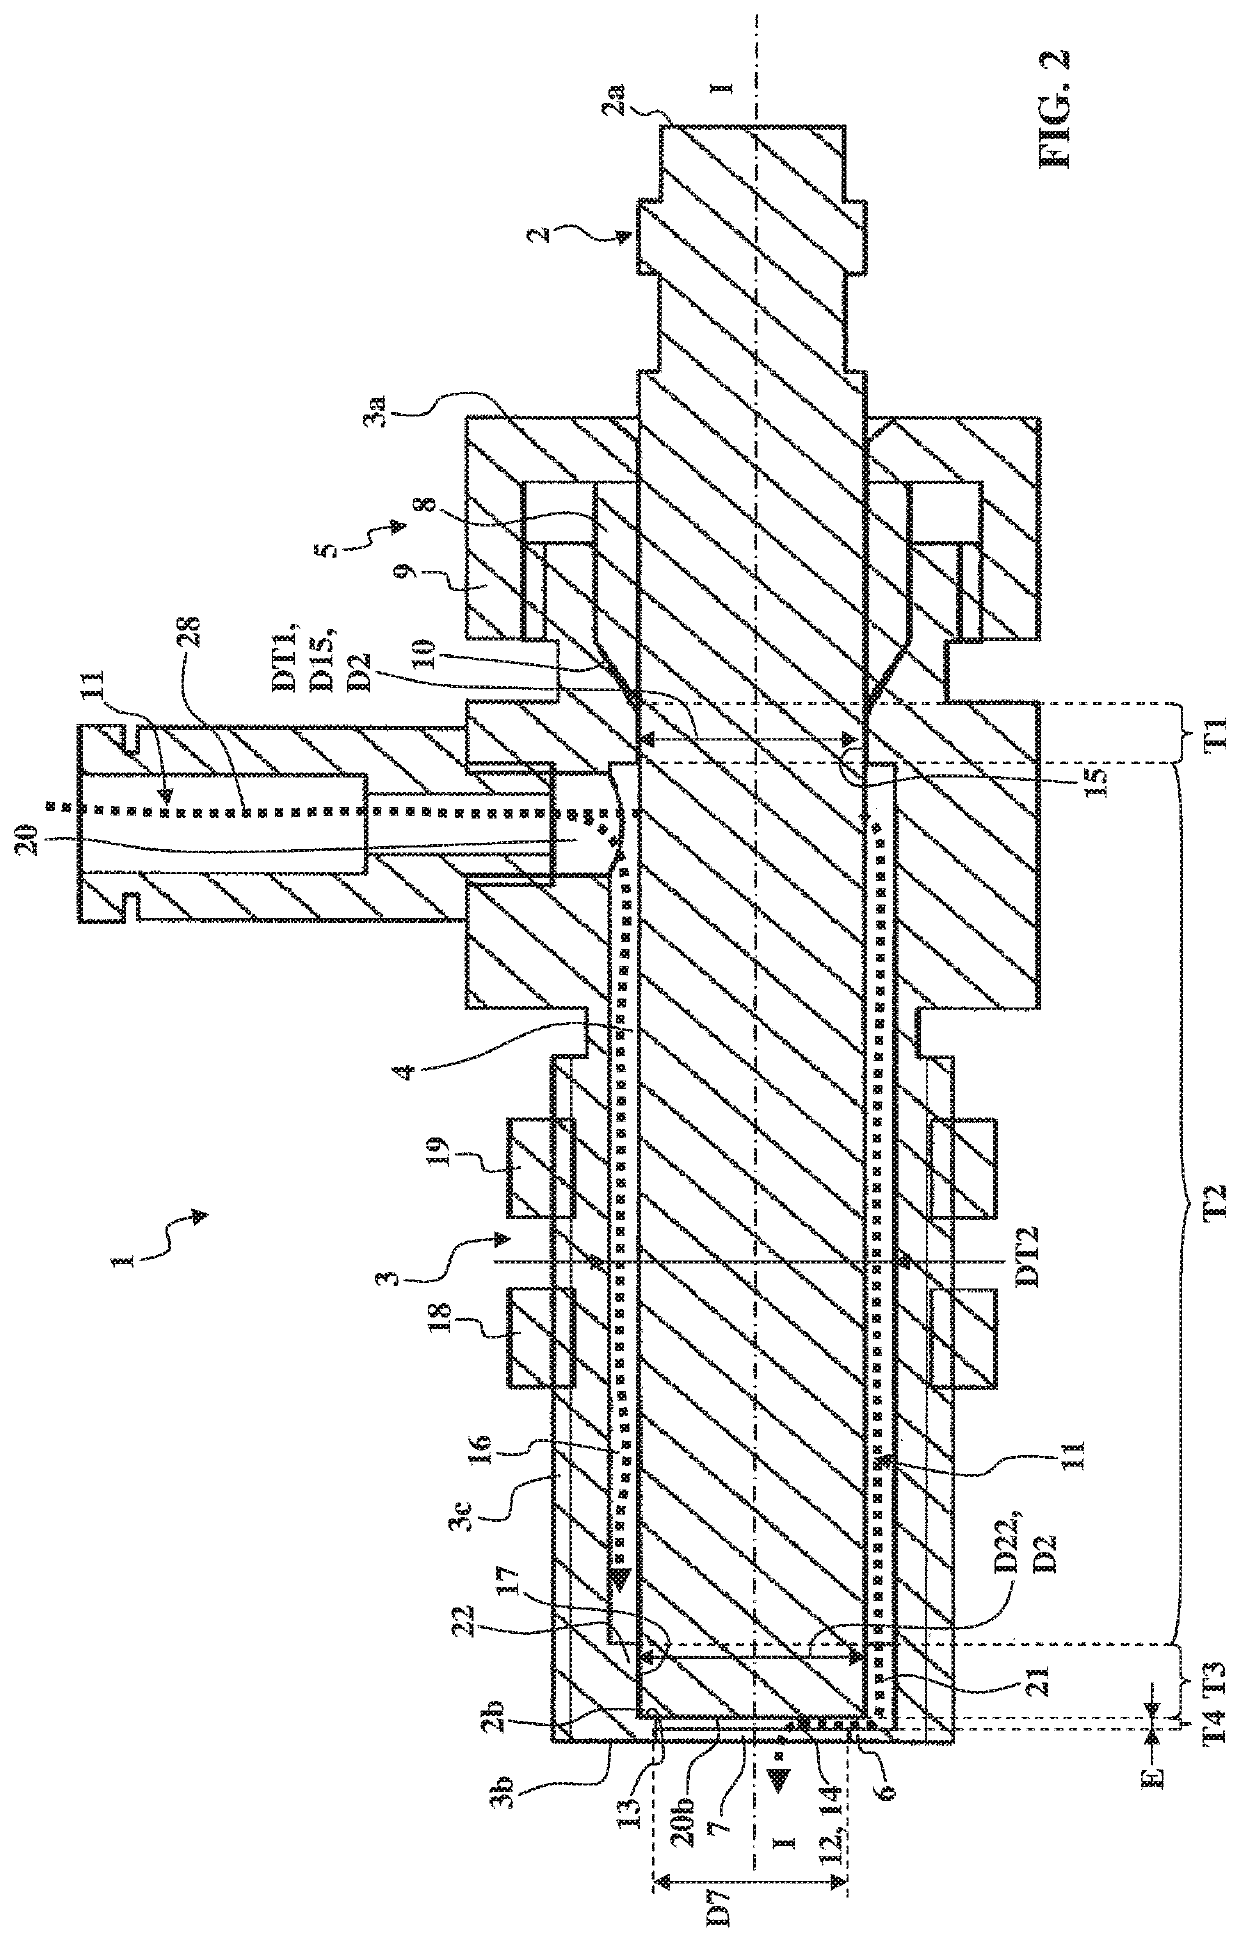 Fastening device for holding a sensor